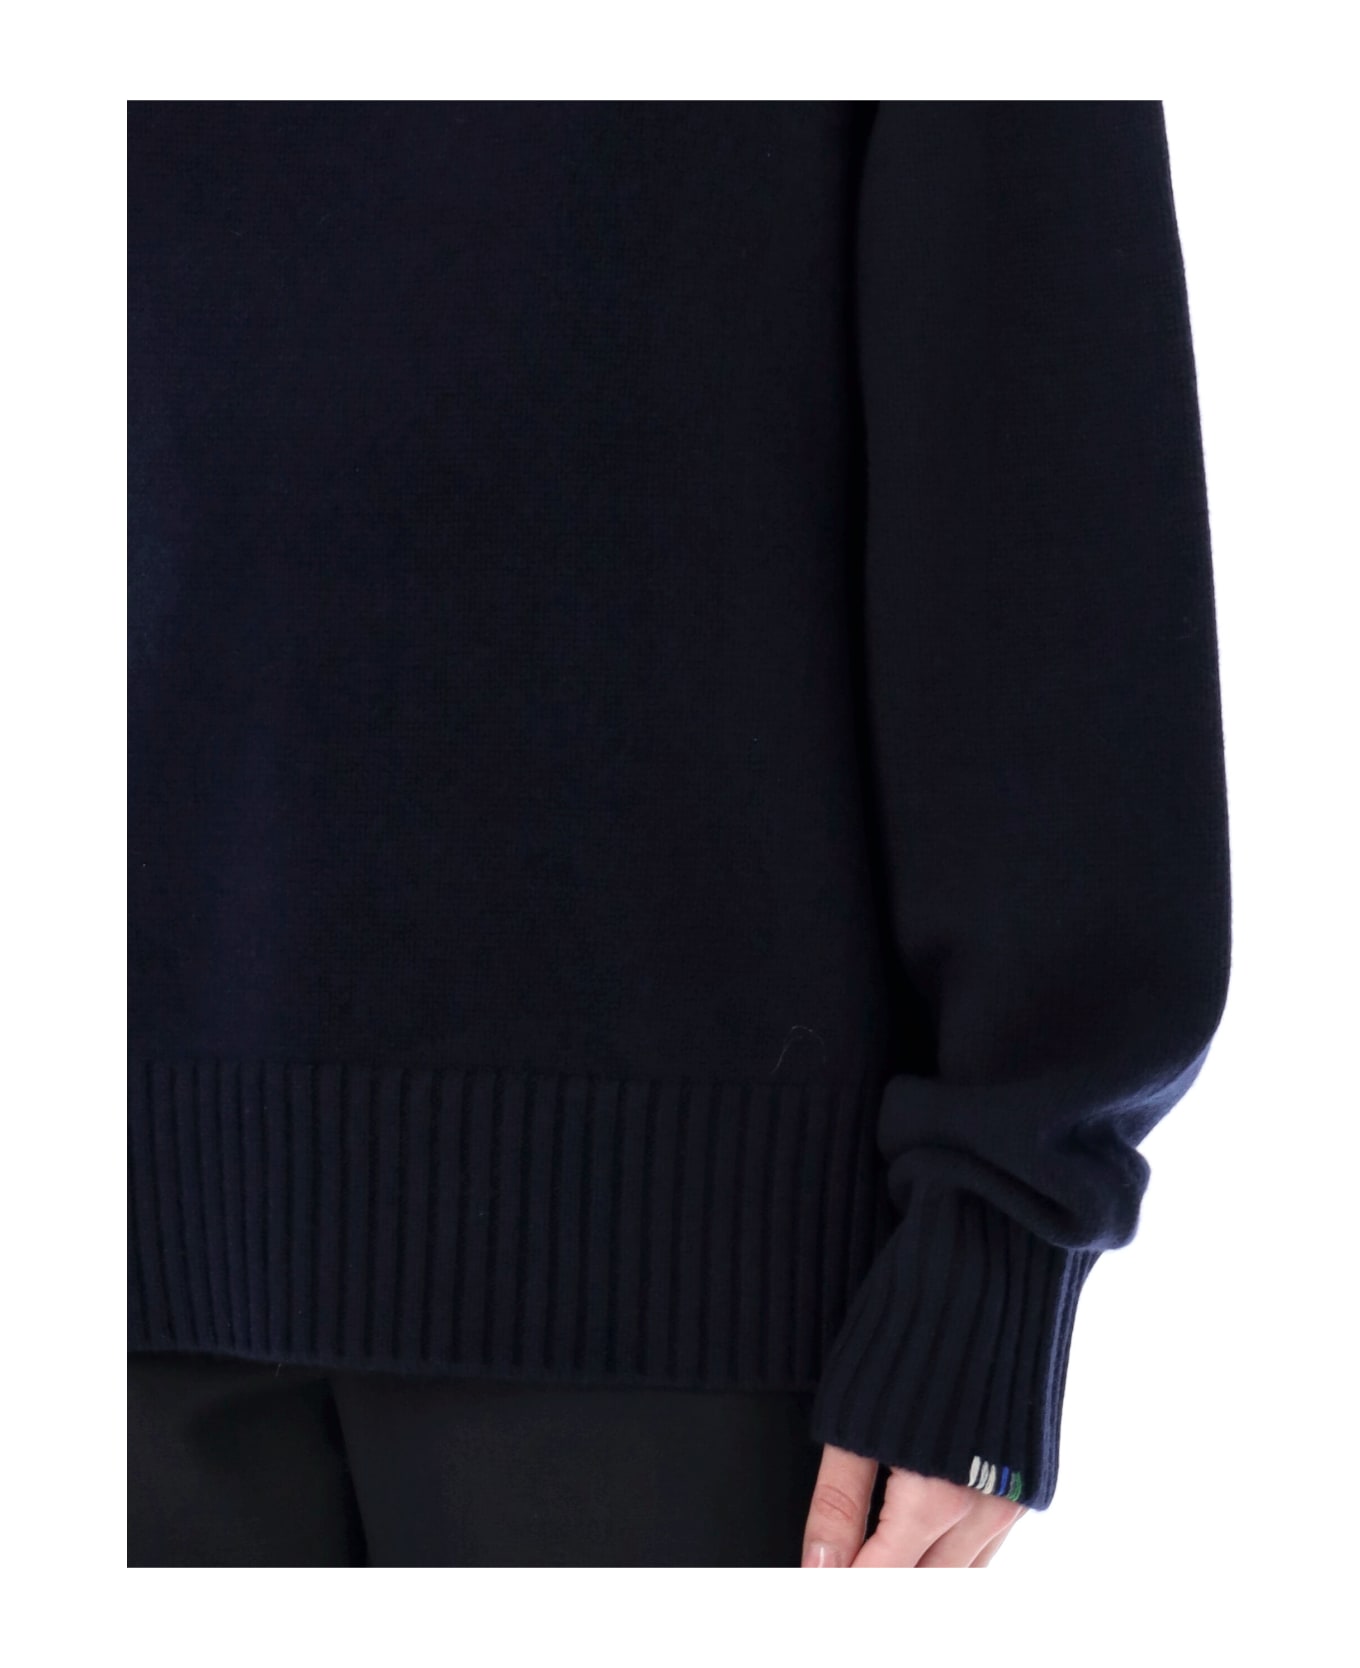 Extreme Cashmere Bourgeois Sweater - NAVY name:475